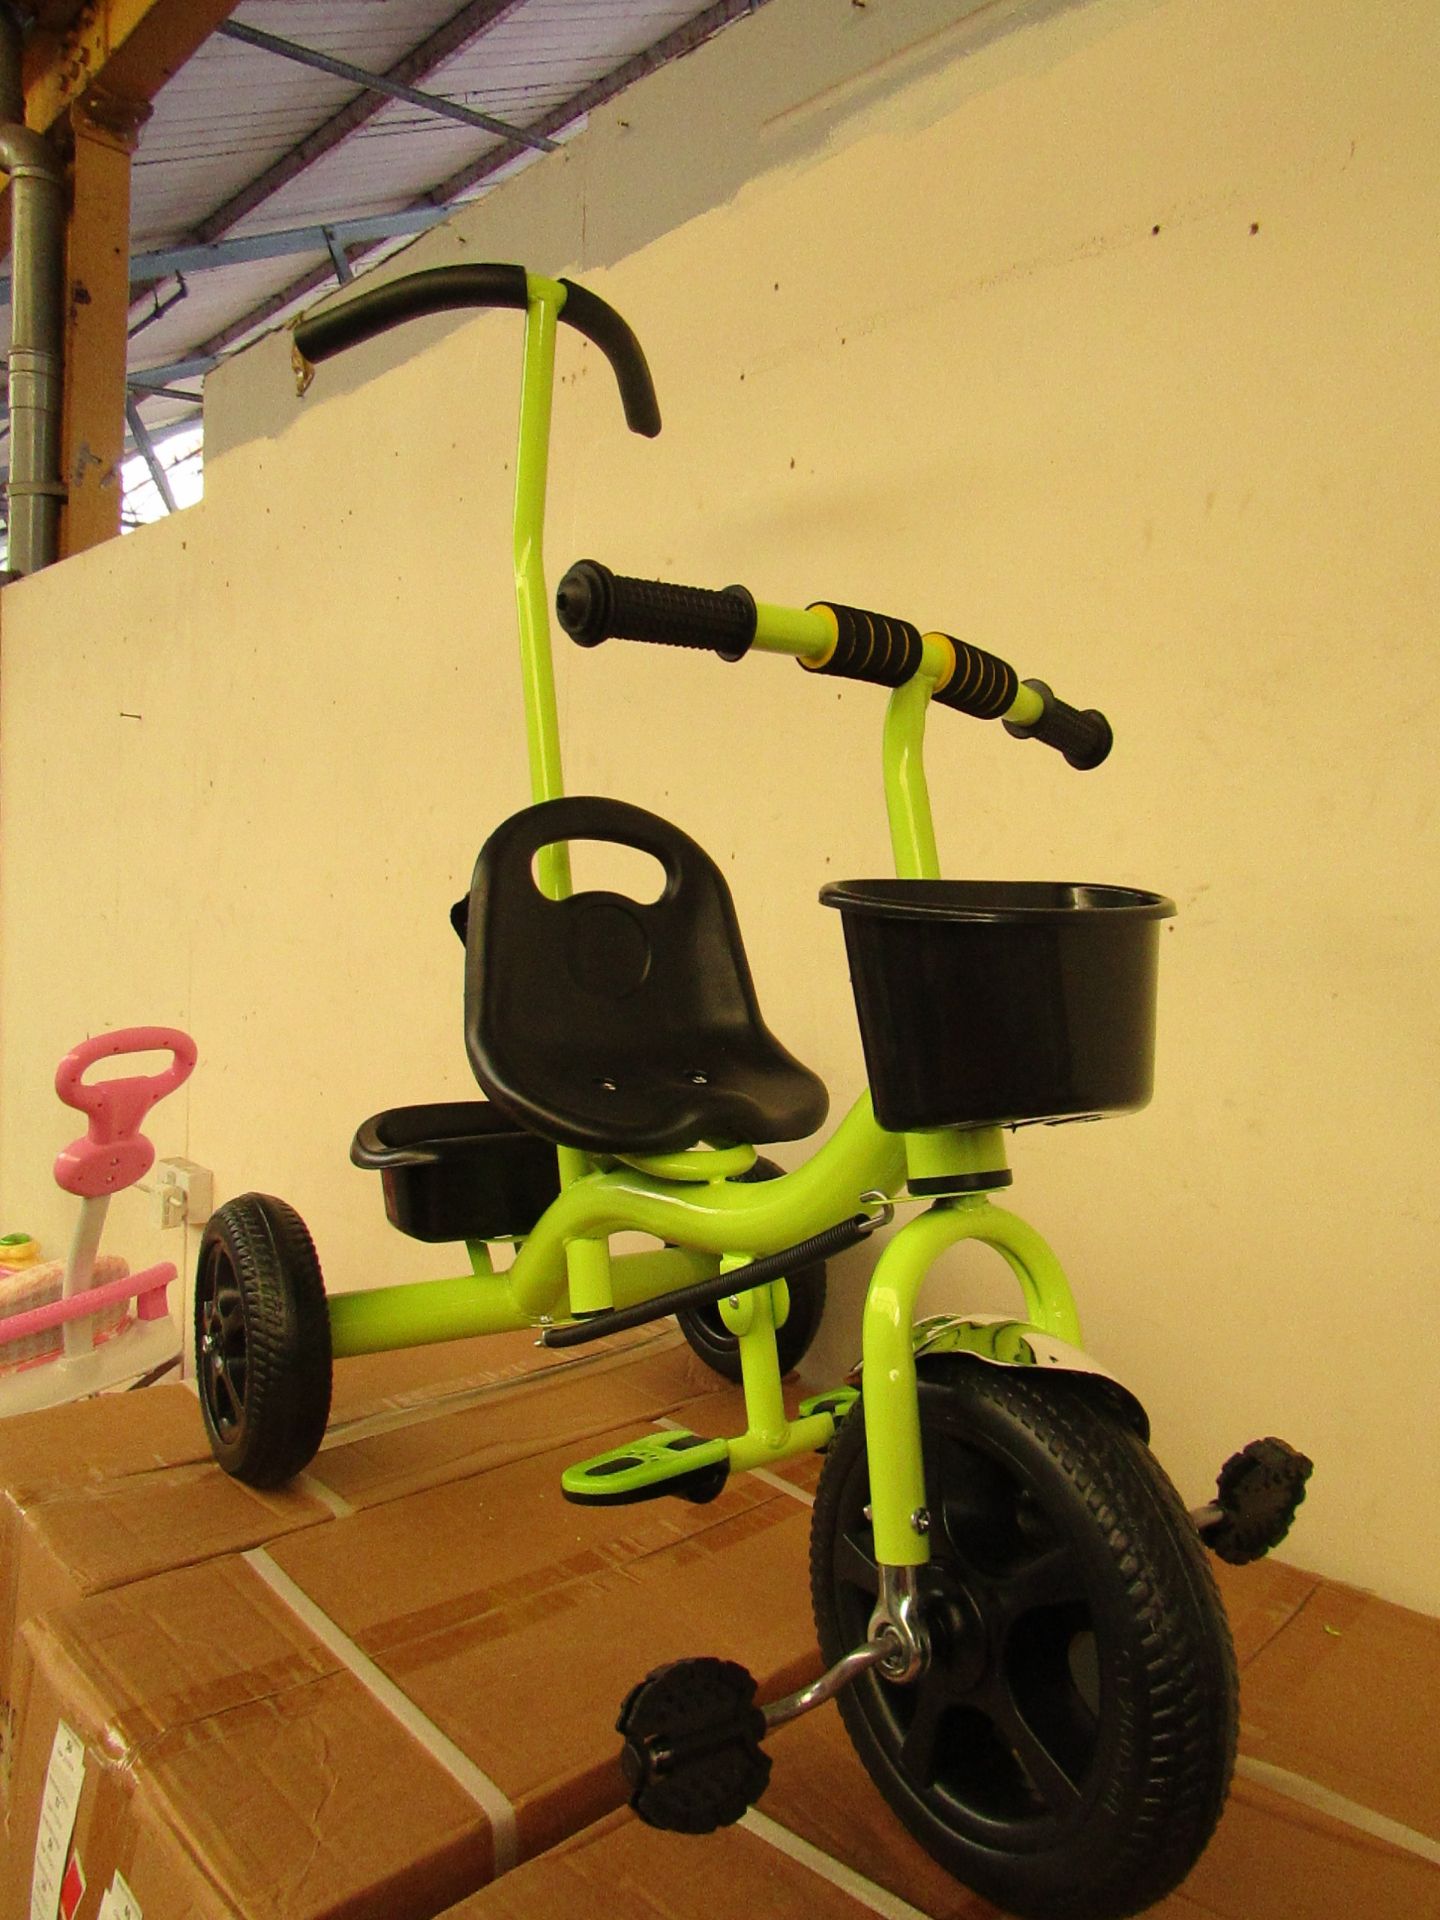 Red colour tricycle with parental control handle. New and boxed. (Picture is to illustrate the